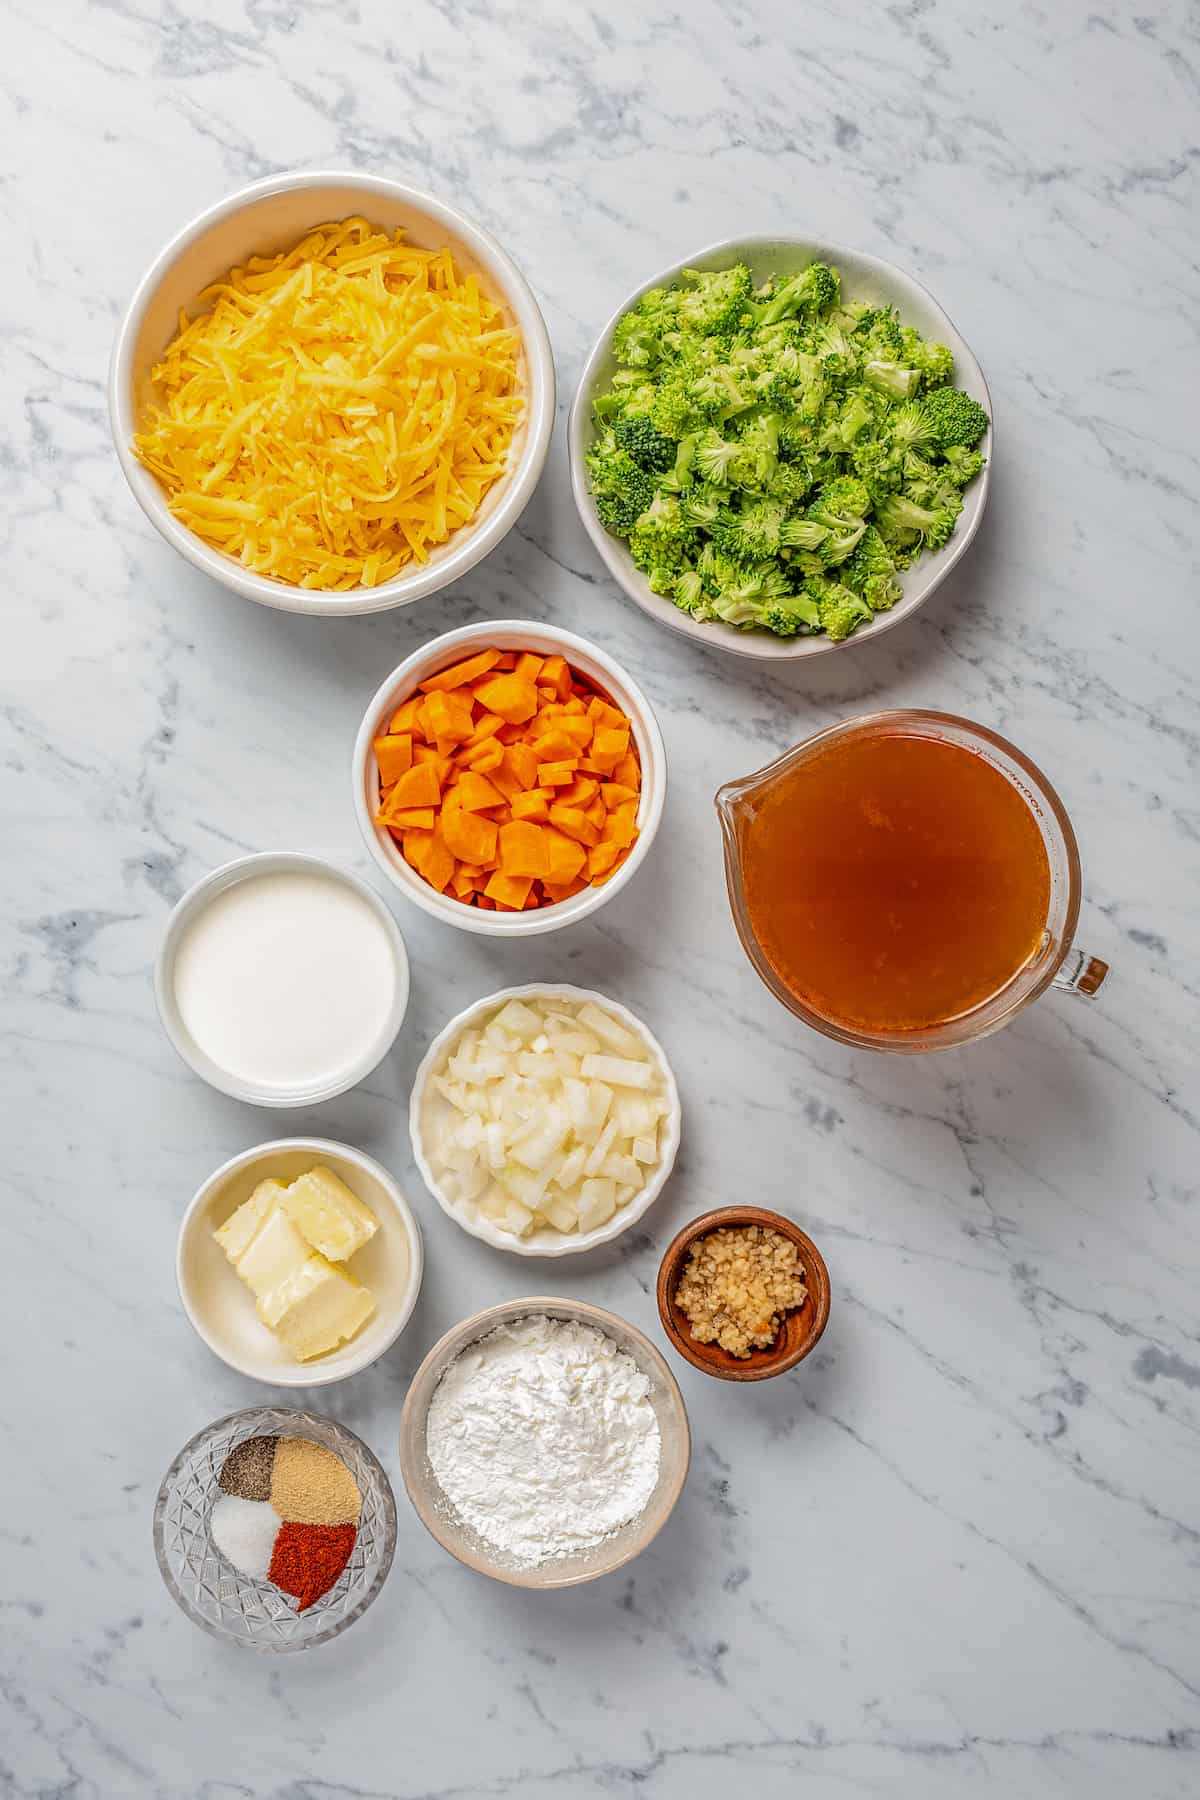 The ingredients for Instant Pot broccoli cheese soup.